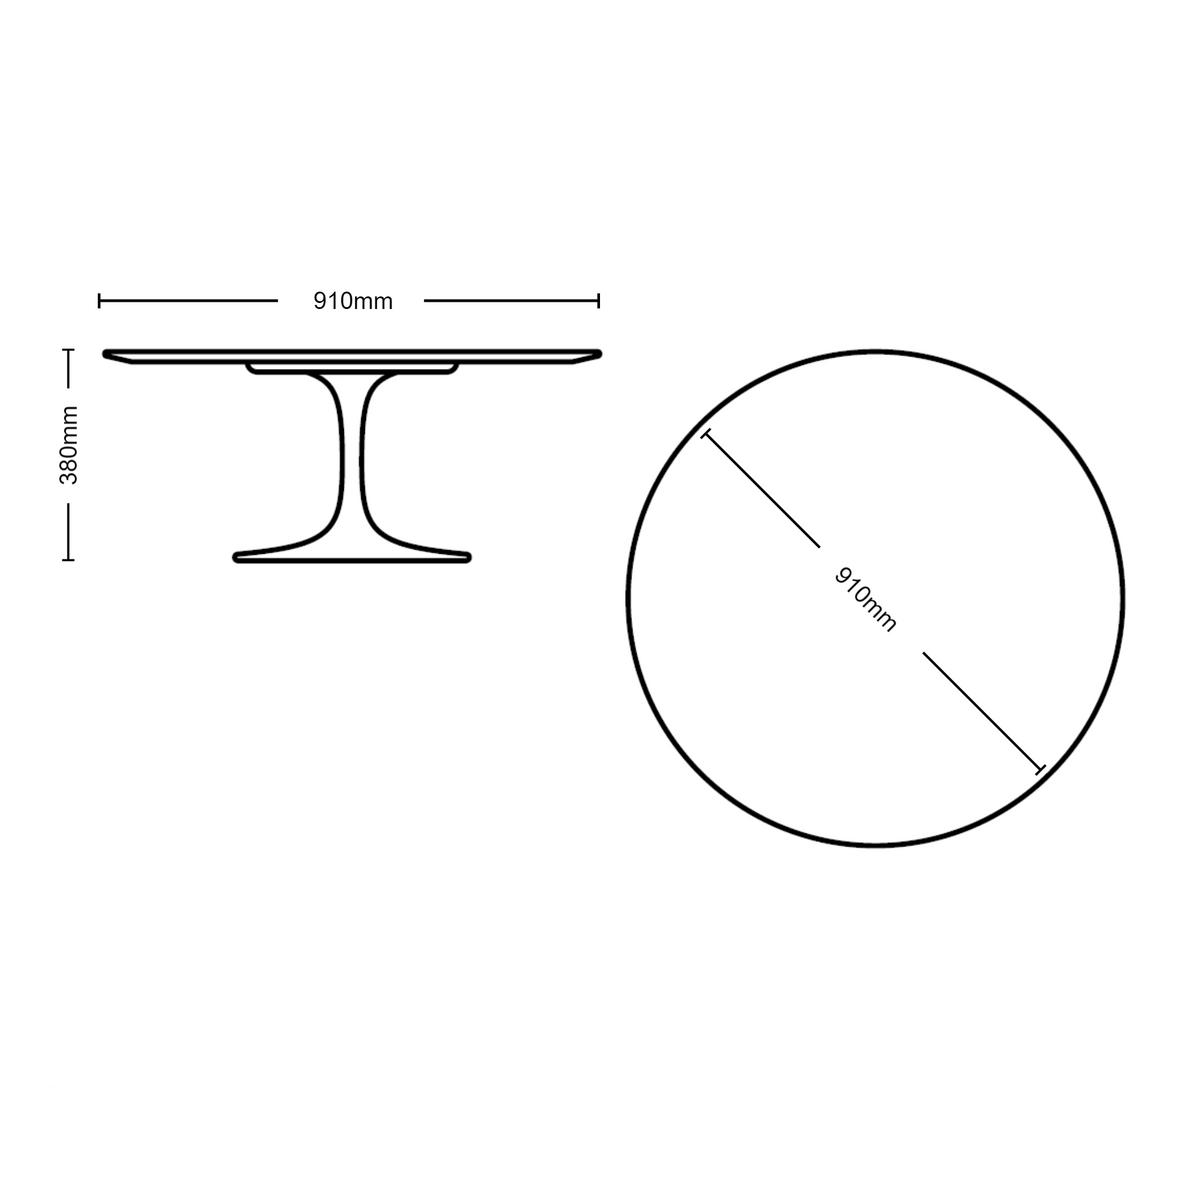 Dimensions for Knoll Saarinen Tulip Arabescato Marble Table